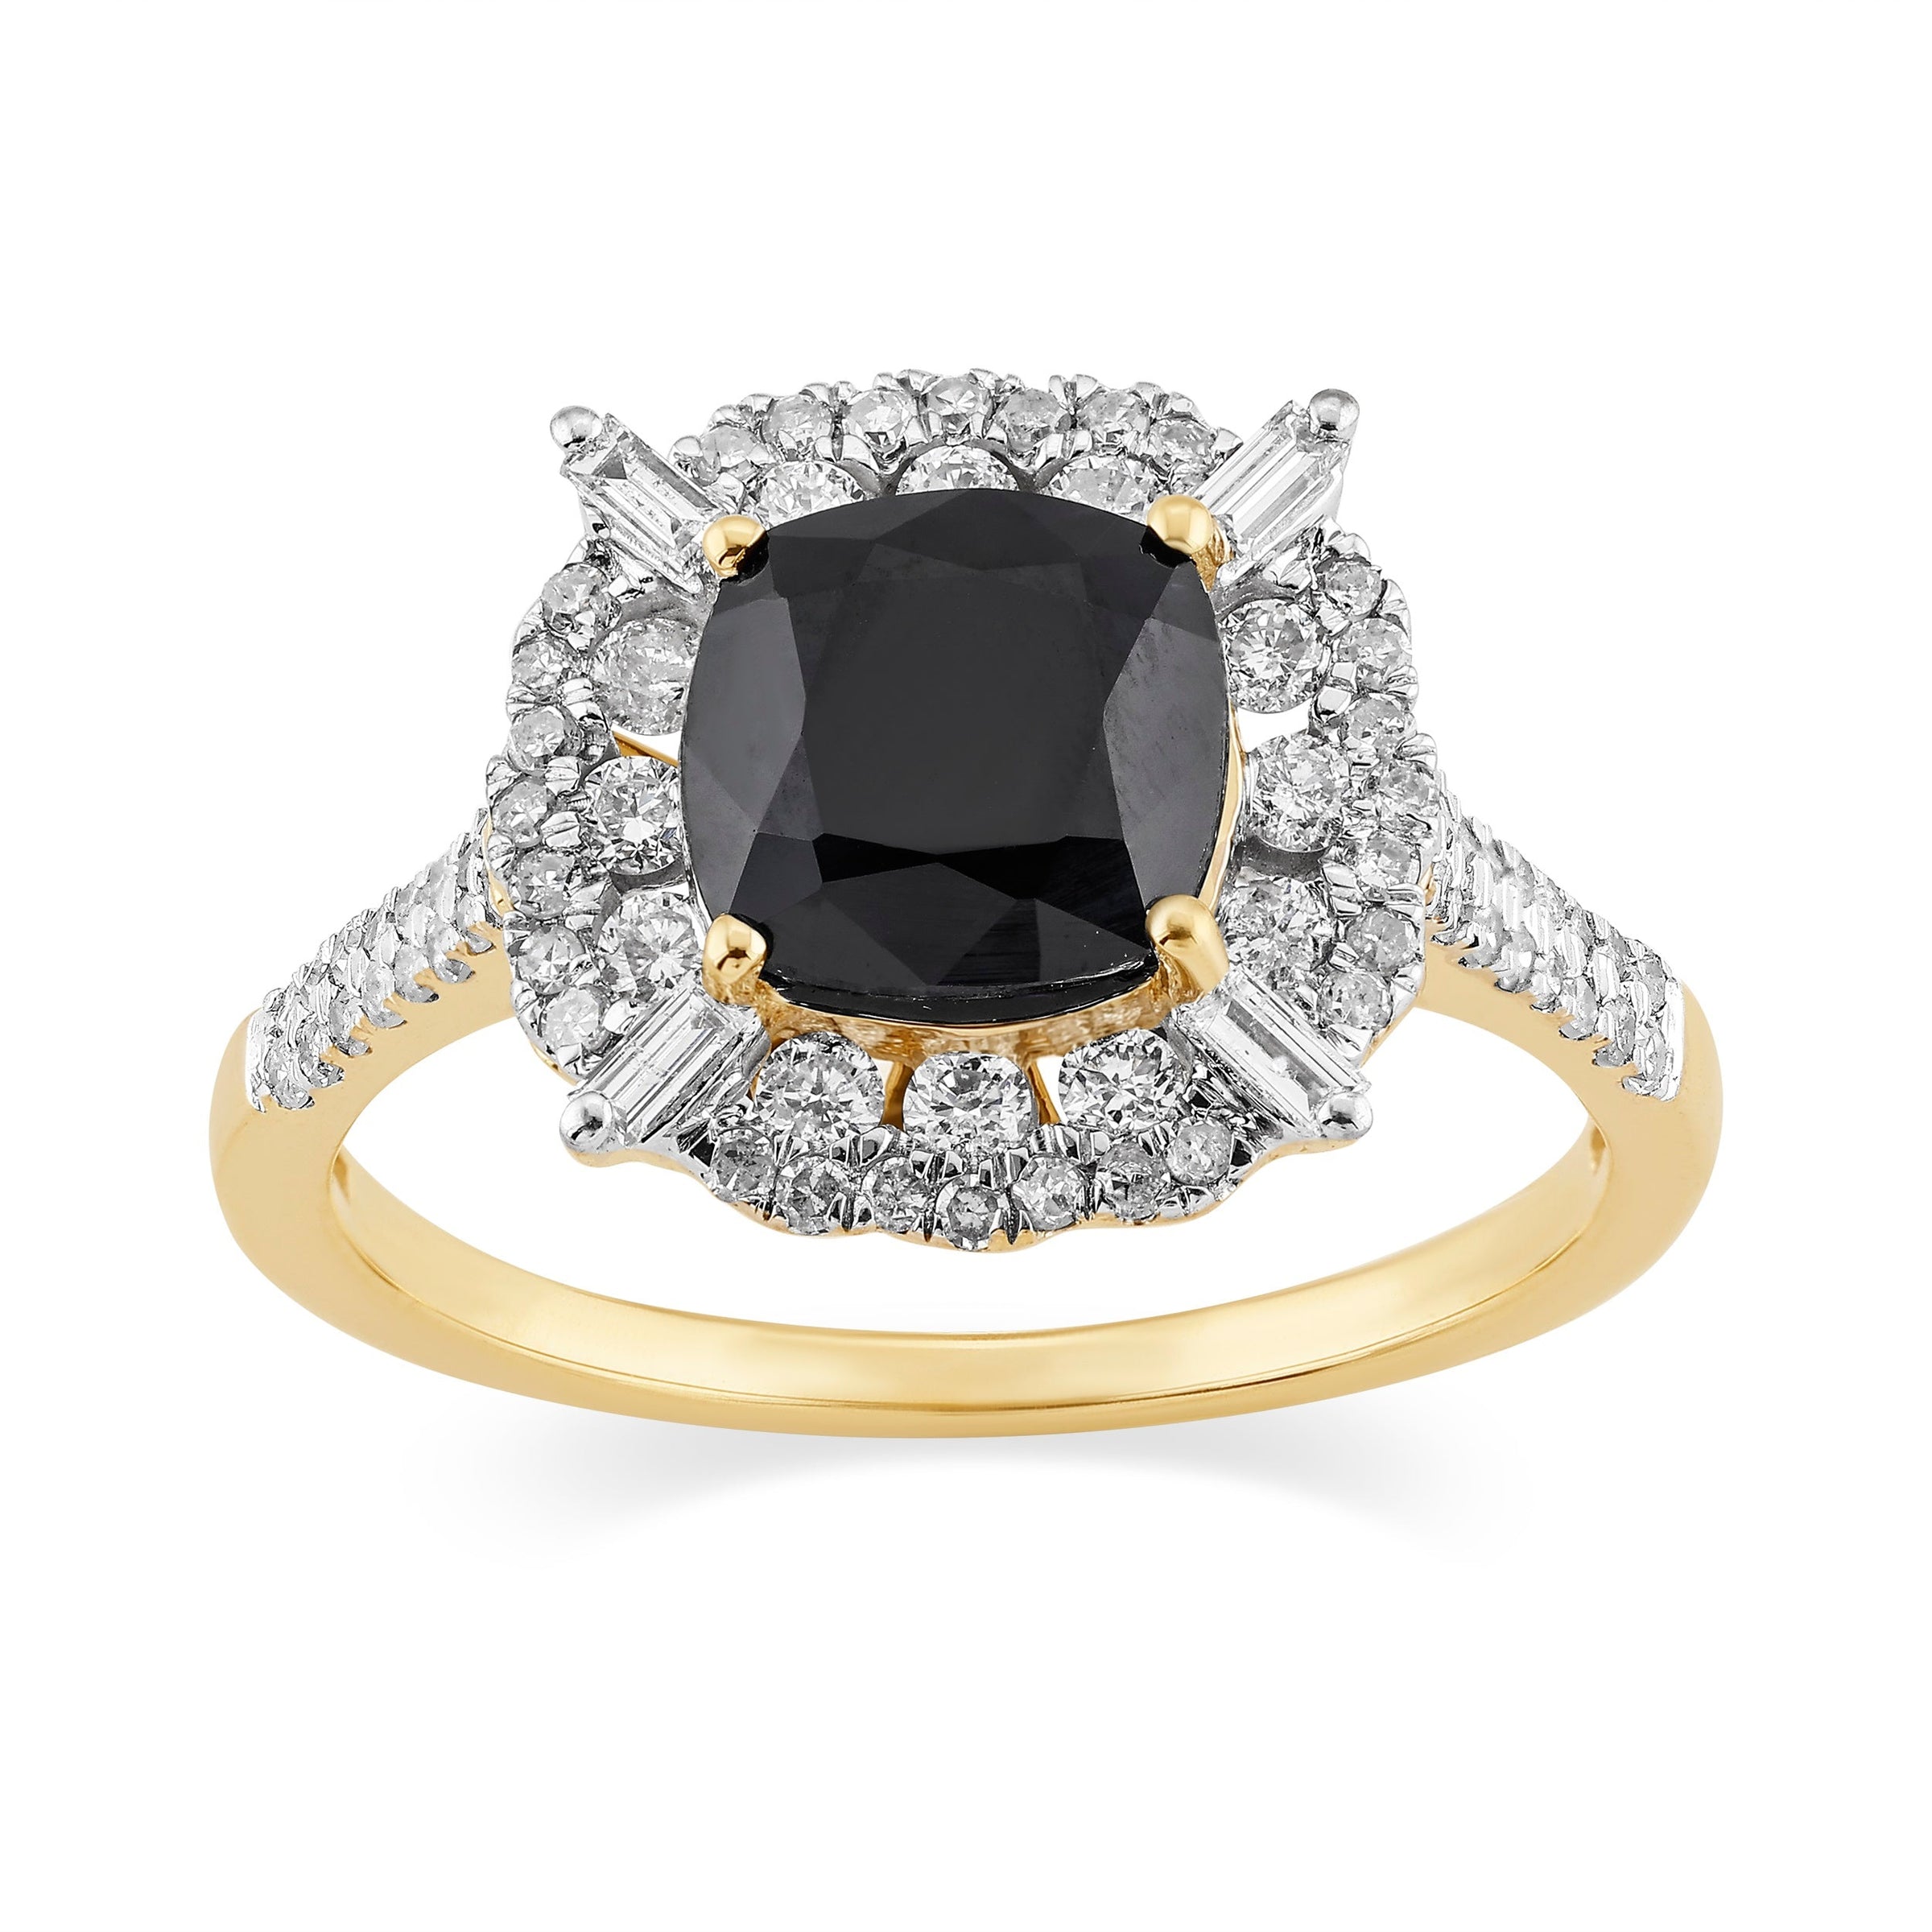 Cushion Sapphire Ring with 1/2ct of Diamonds in 9ct Yellow Gold Rings Bevilles 